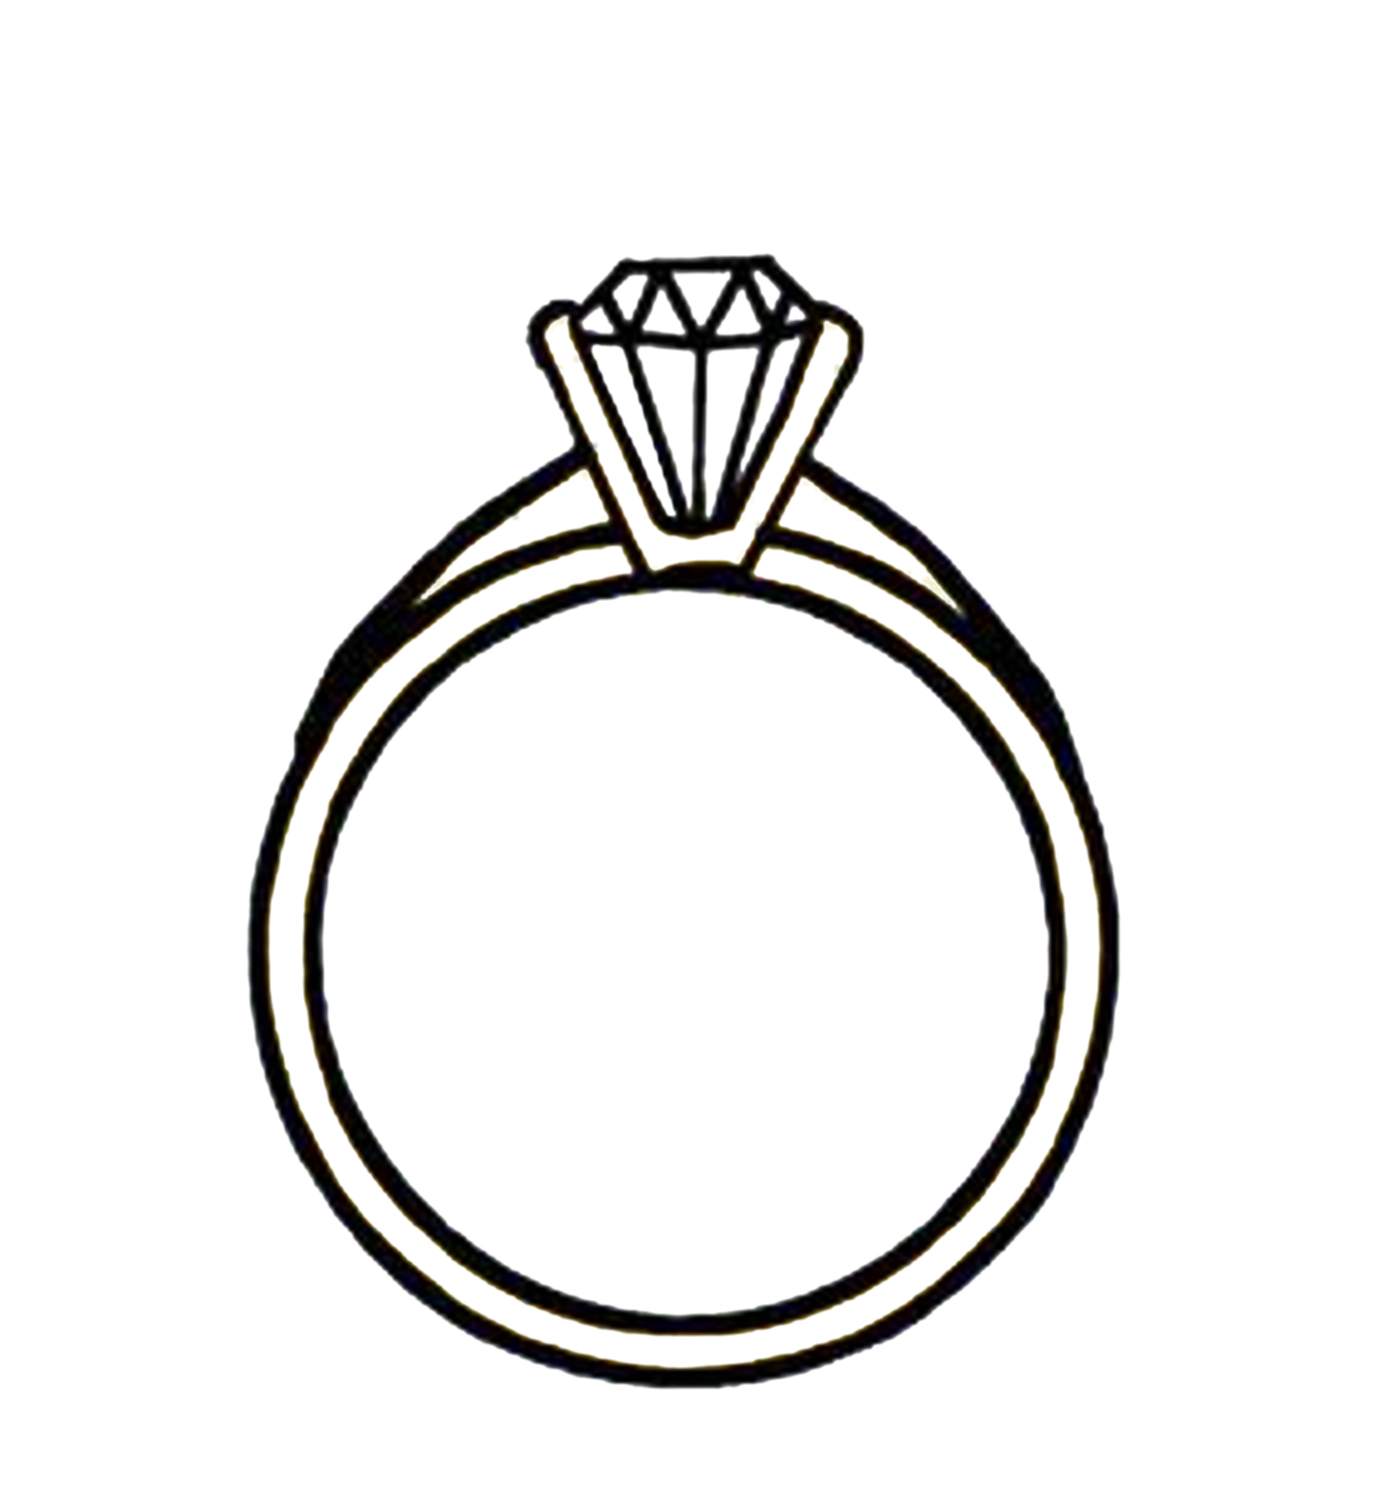 Linked wedding rings clipart free images 3